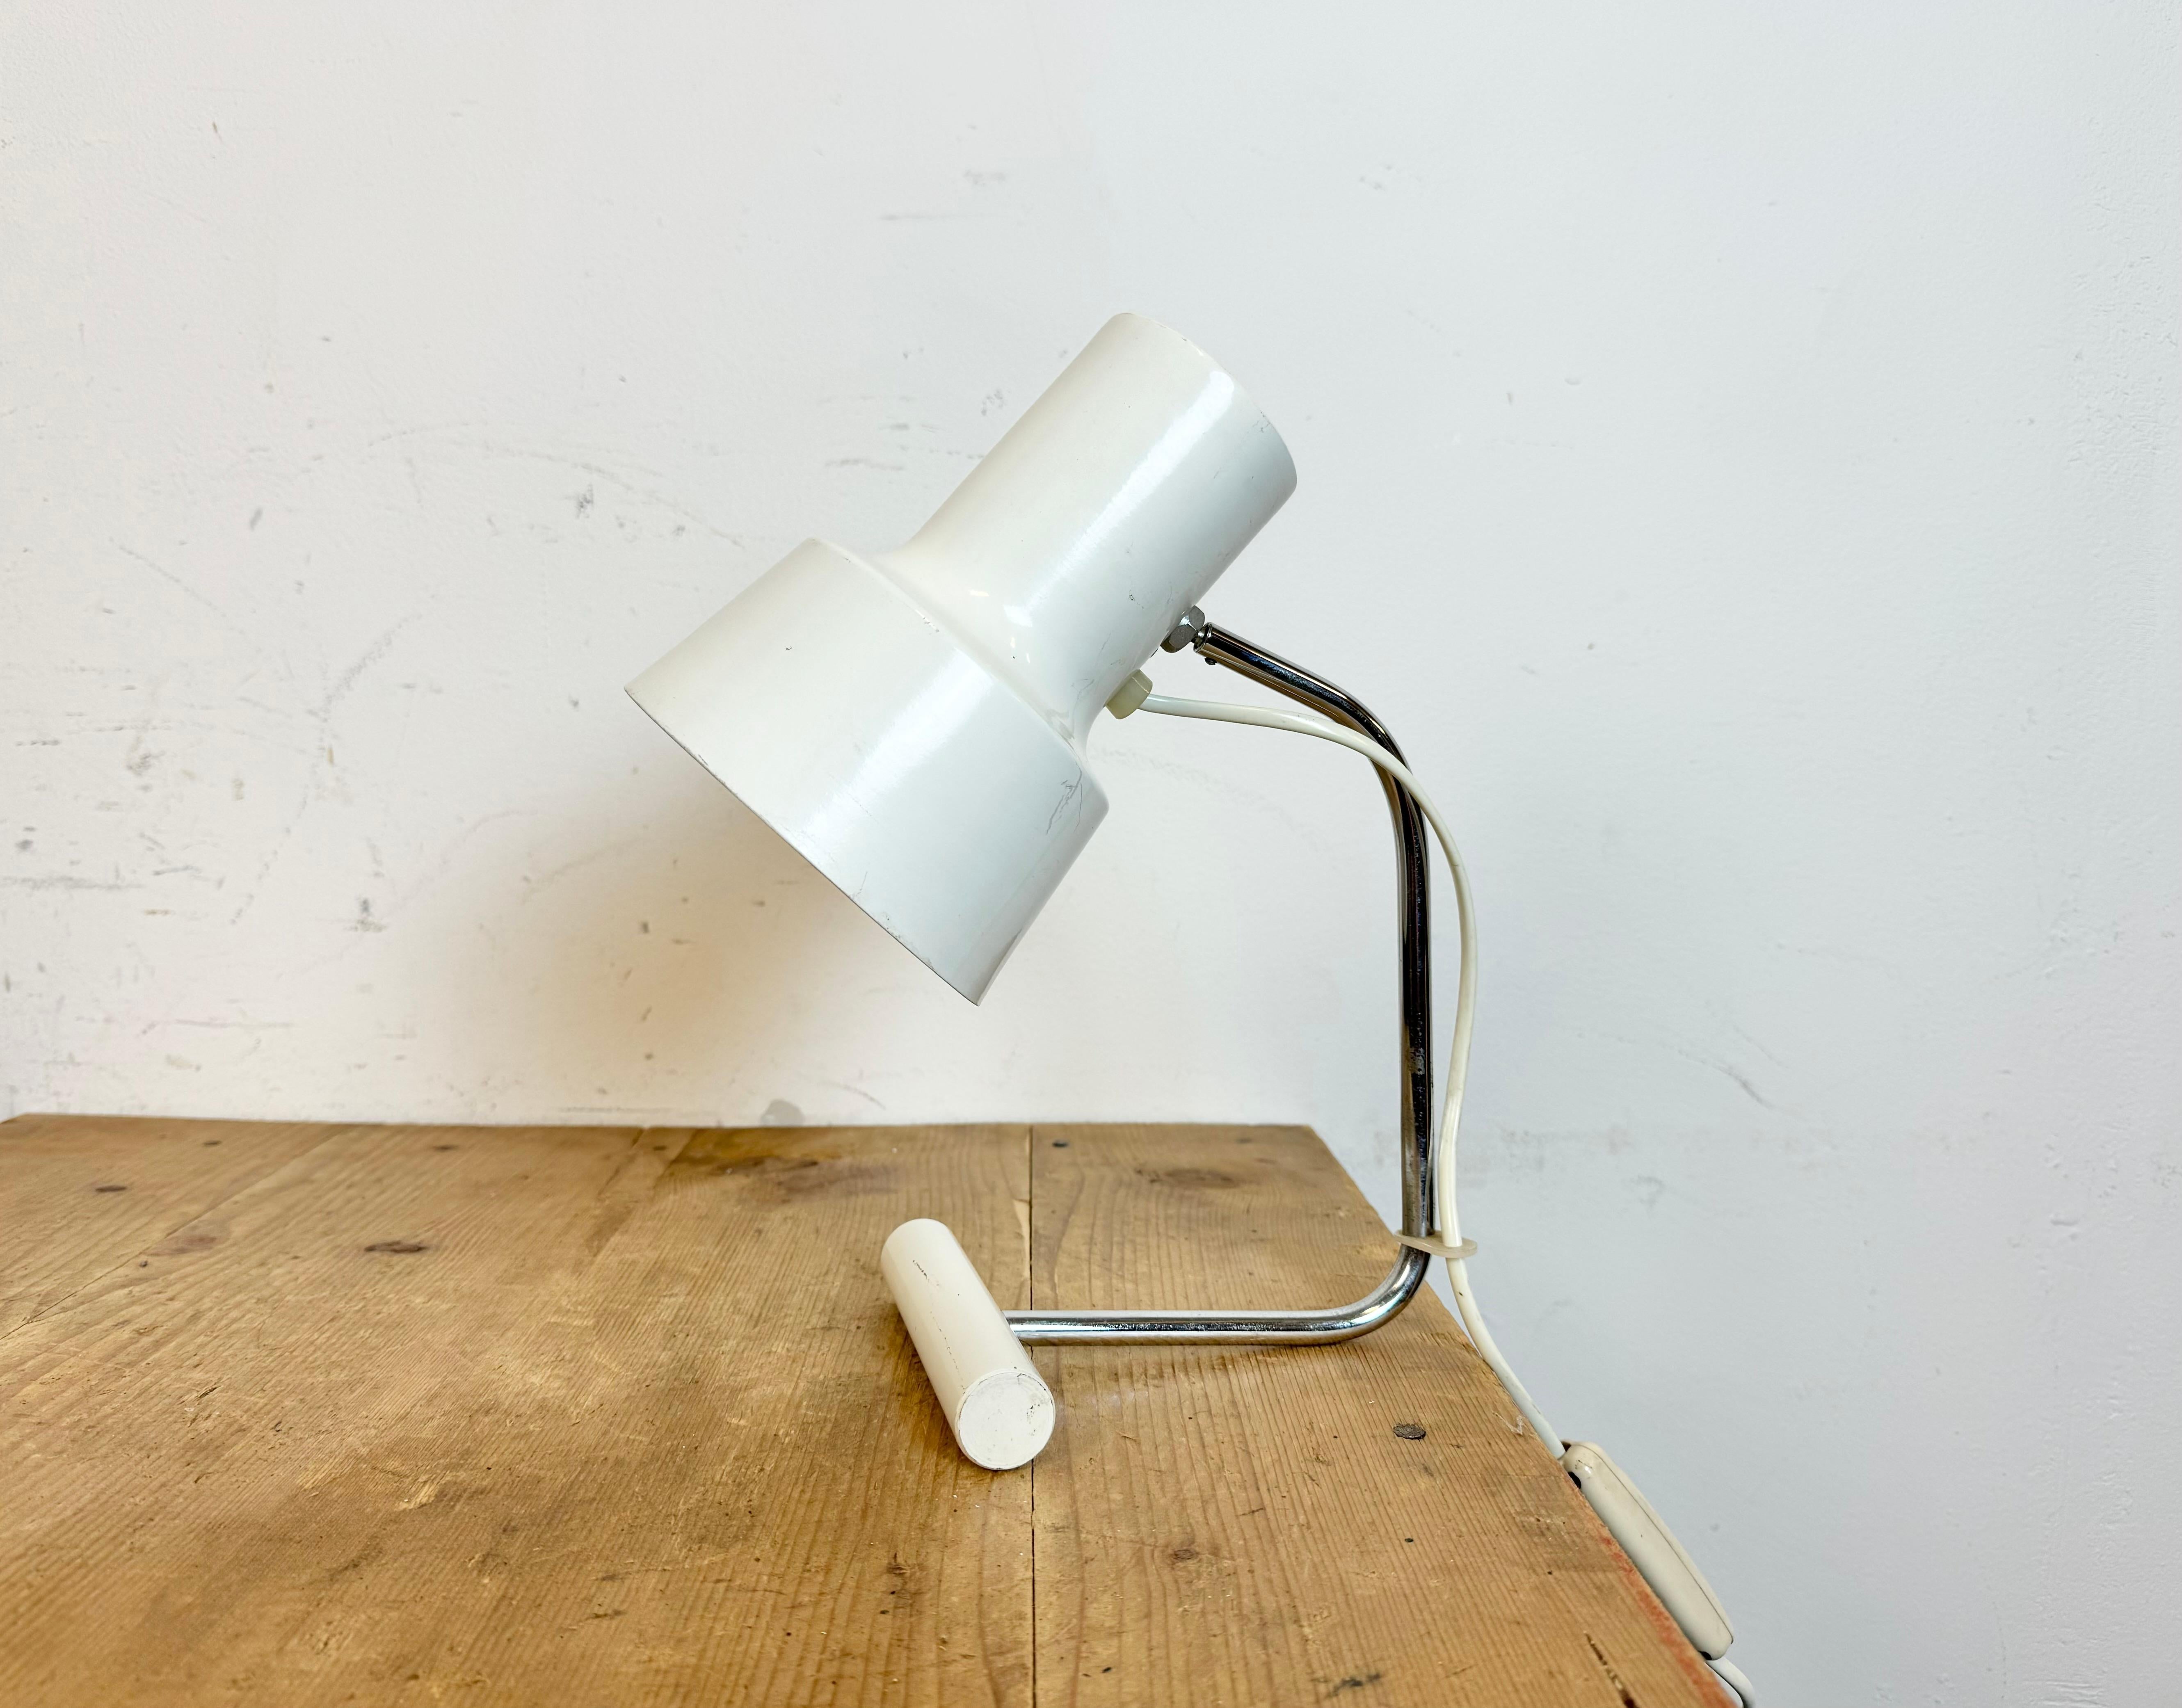 Vintage table lamp designed by Josef Hurka and produced by Napako in former Czechoslovakia during the 1970s.It features an aluminium shade and chrome plated arm with iron base The original socket requires E27/ E26 light bulbs. The diameter of the